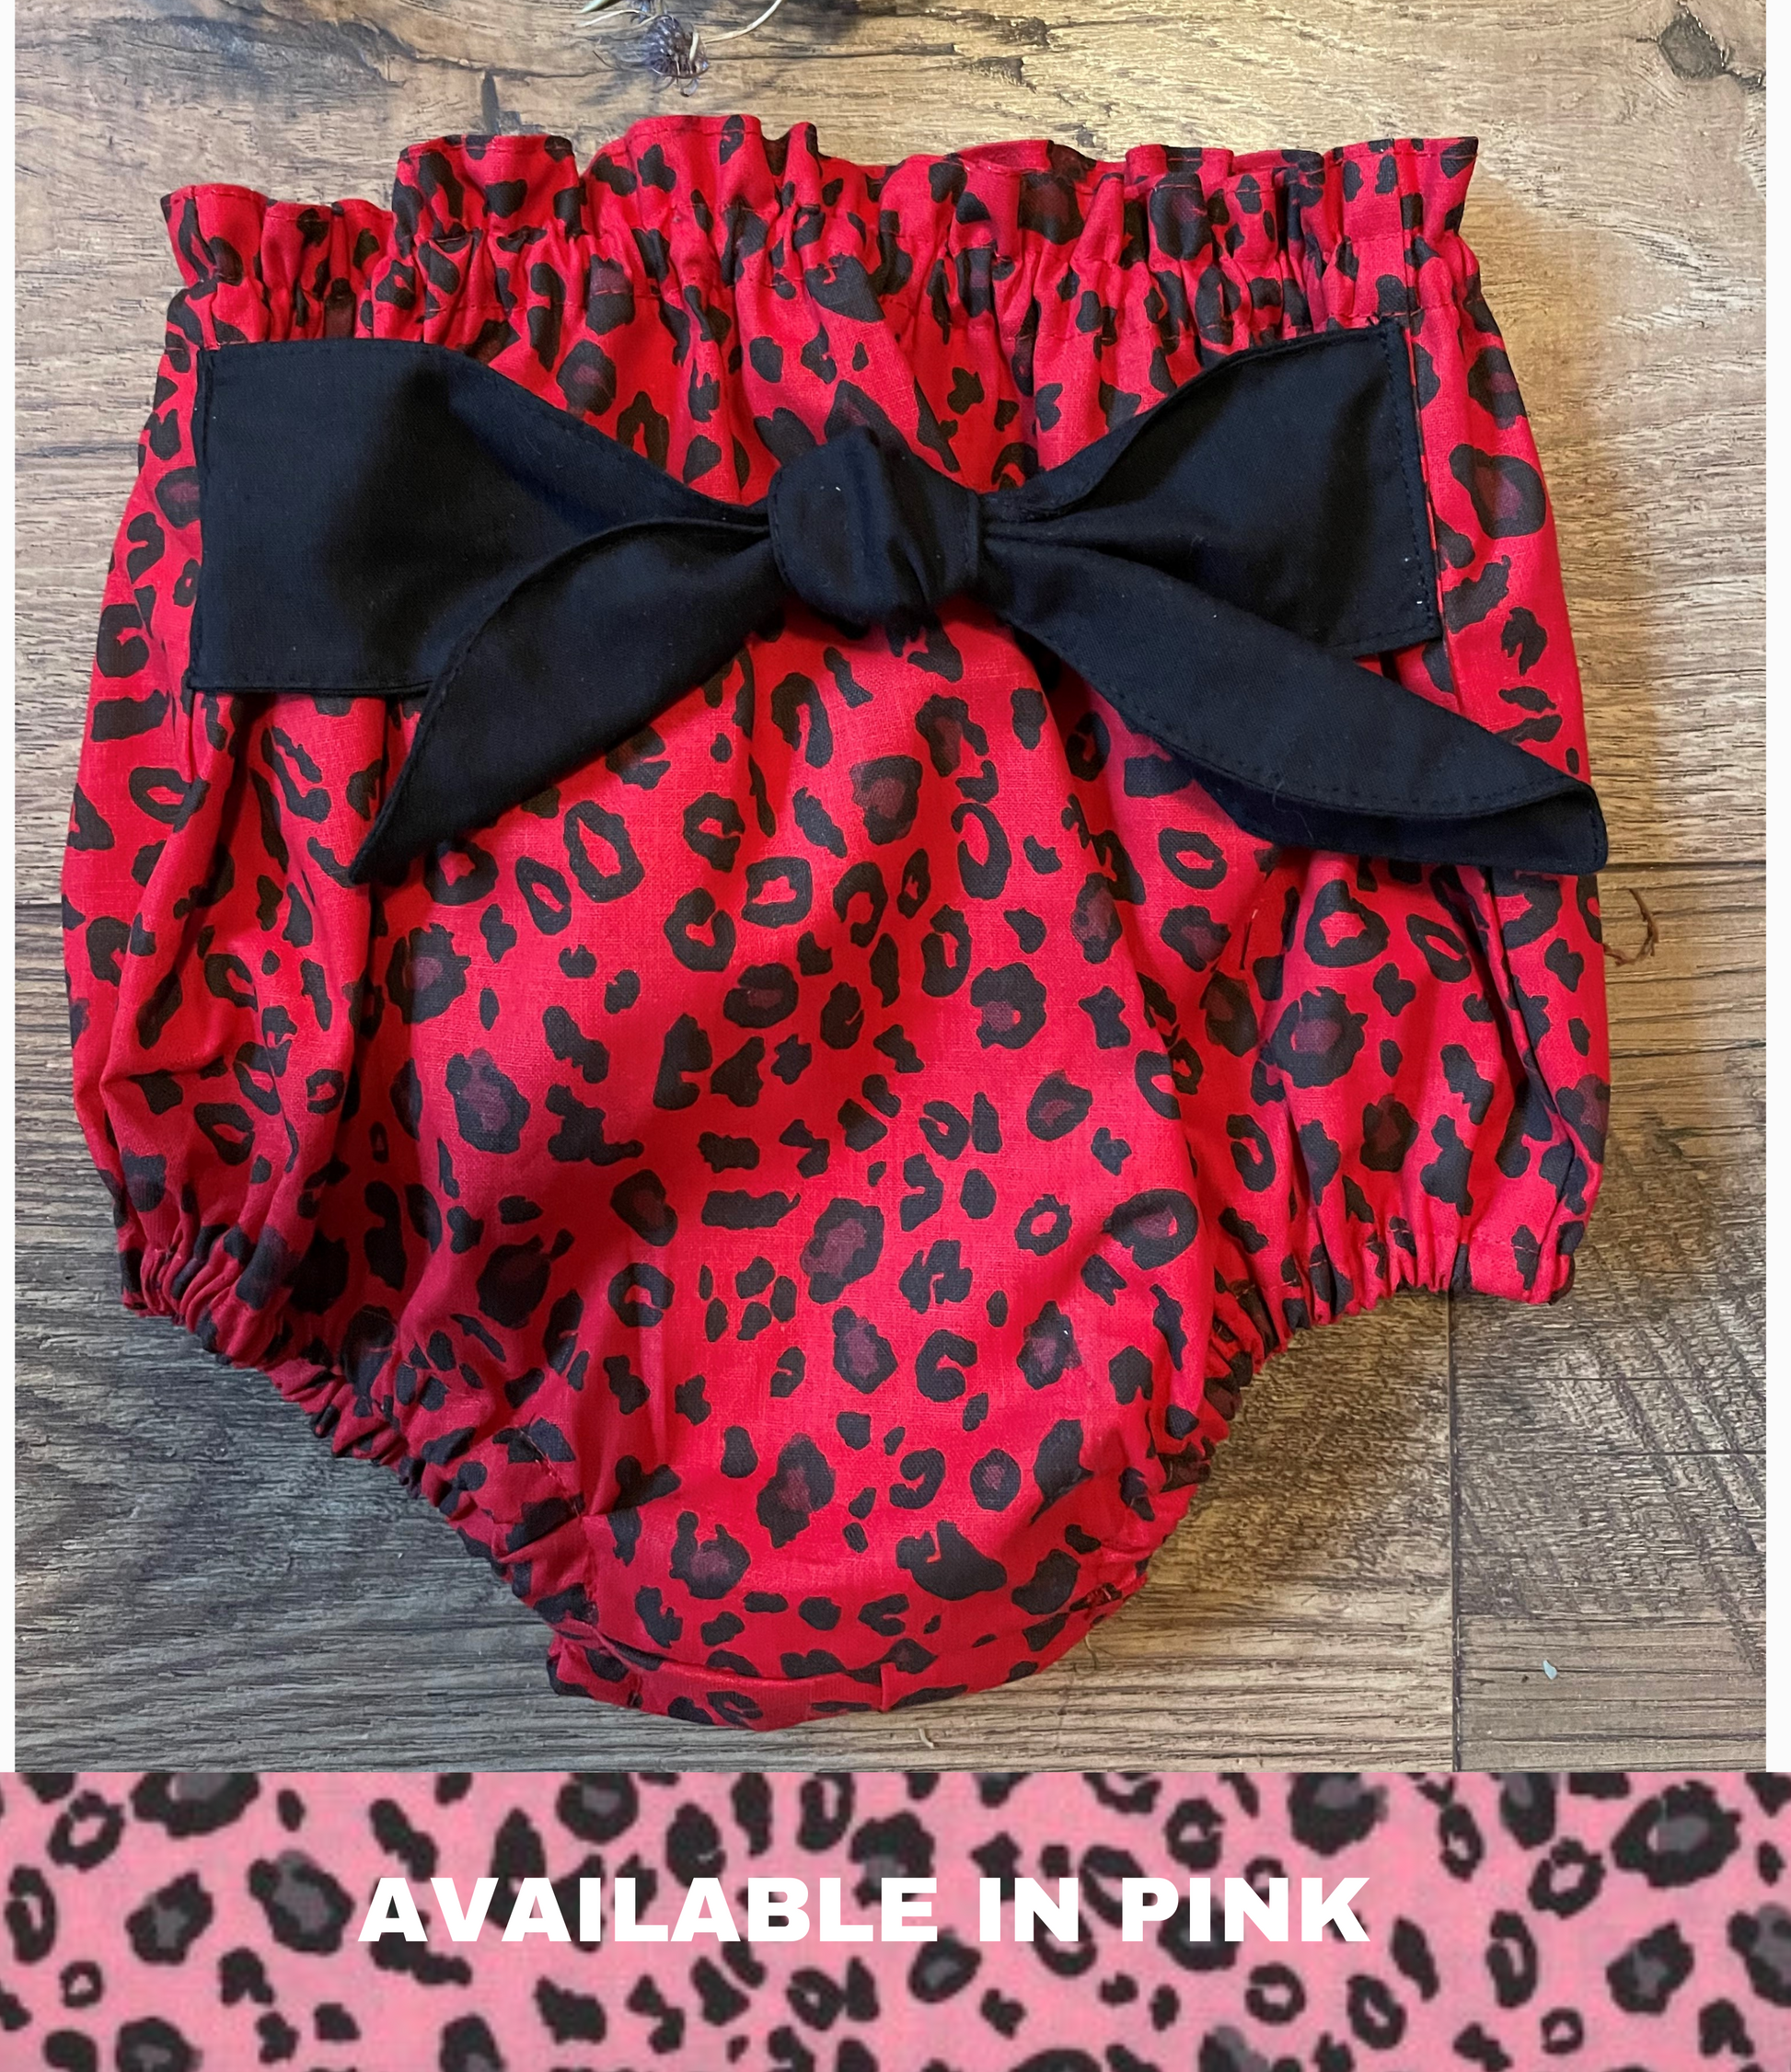 Cheetah Girls Infant & Toddler Boho Style Bloomers with Tie Diaper Cover Valentine's Day